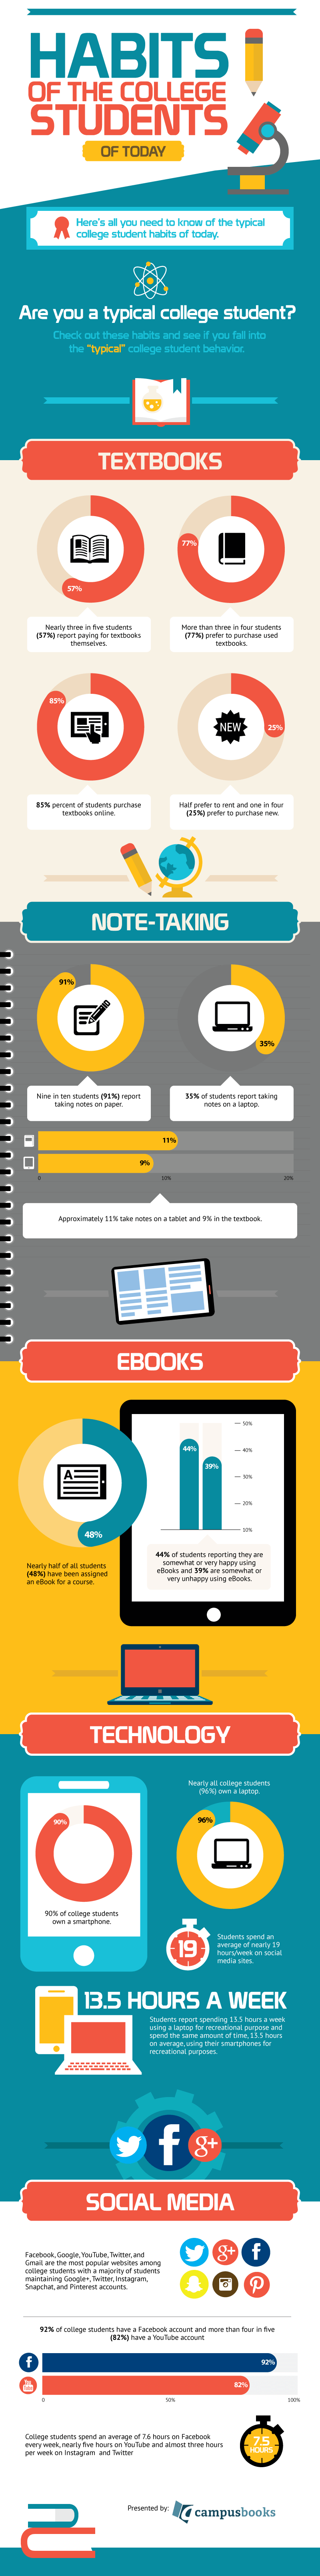 The Habits of Today’s College Students Infographic